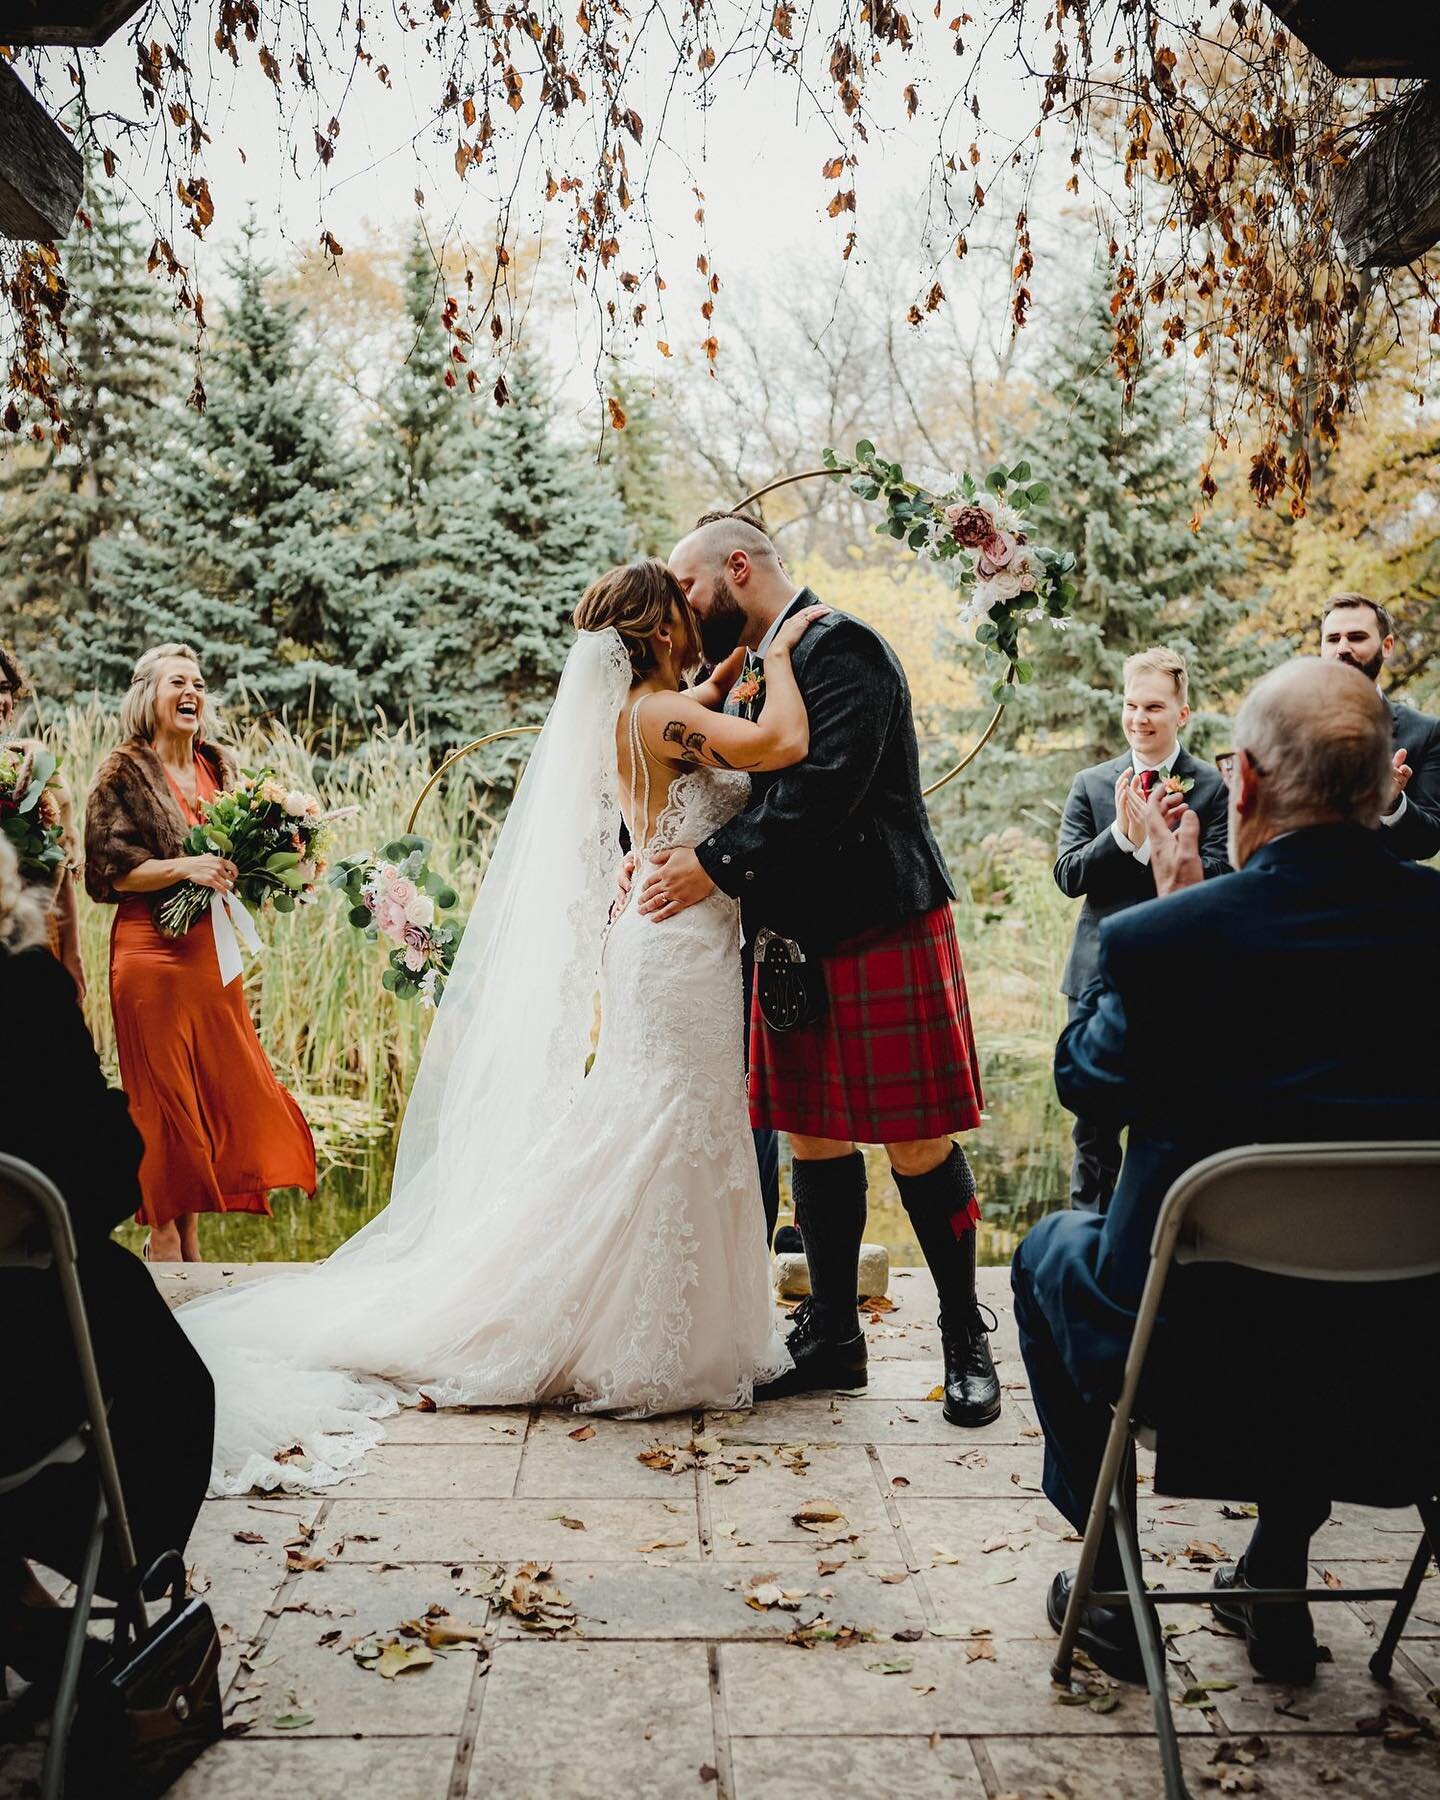 They fell in love with music and eventually each other. Cassandra and Graeme, two talented bagpipe players were meant to be and we were so lucky to witness their special day at Assiniboine Park. 

A first look at the Low Life brewery was followed by 